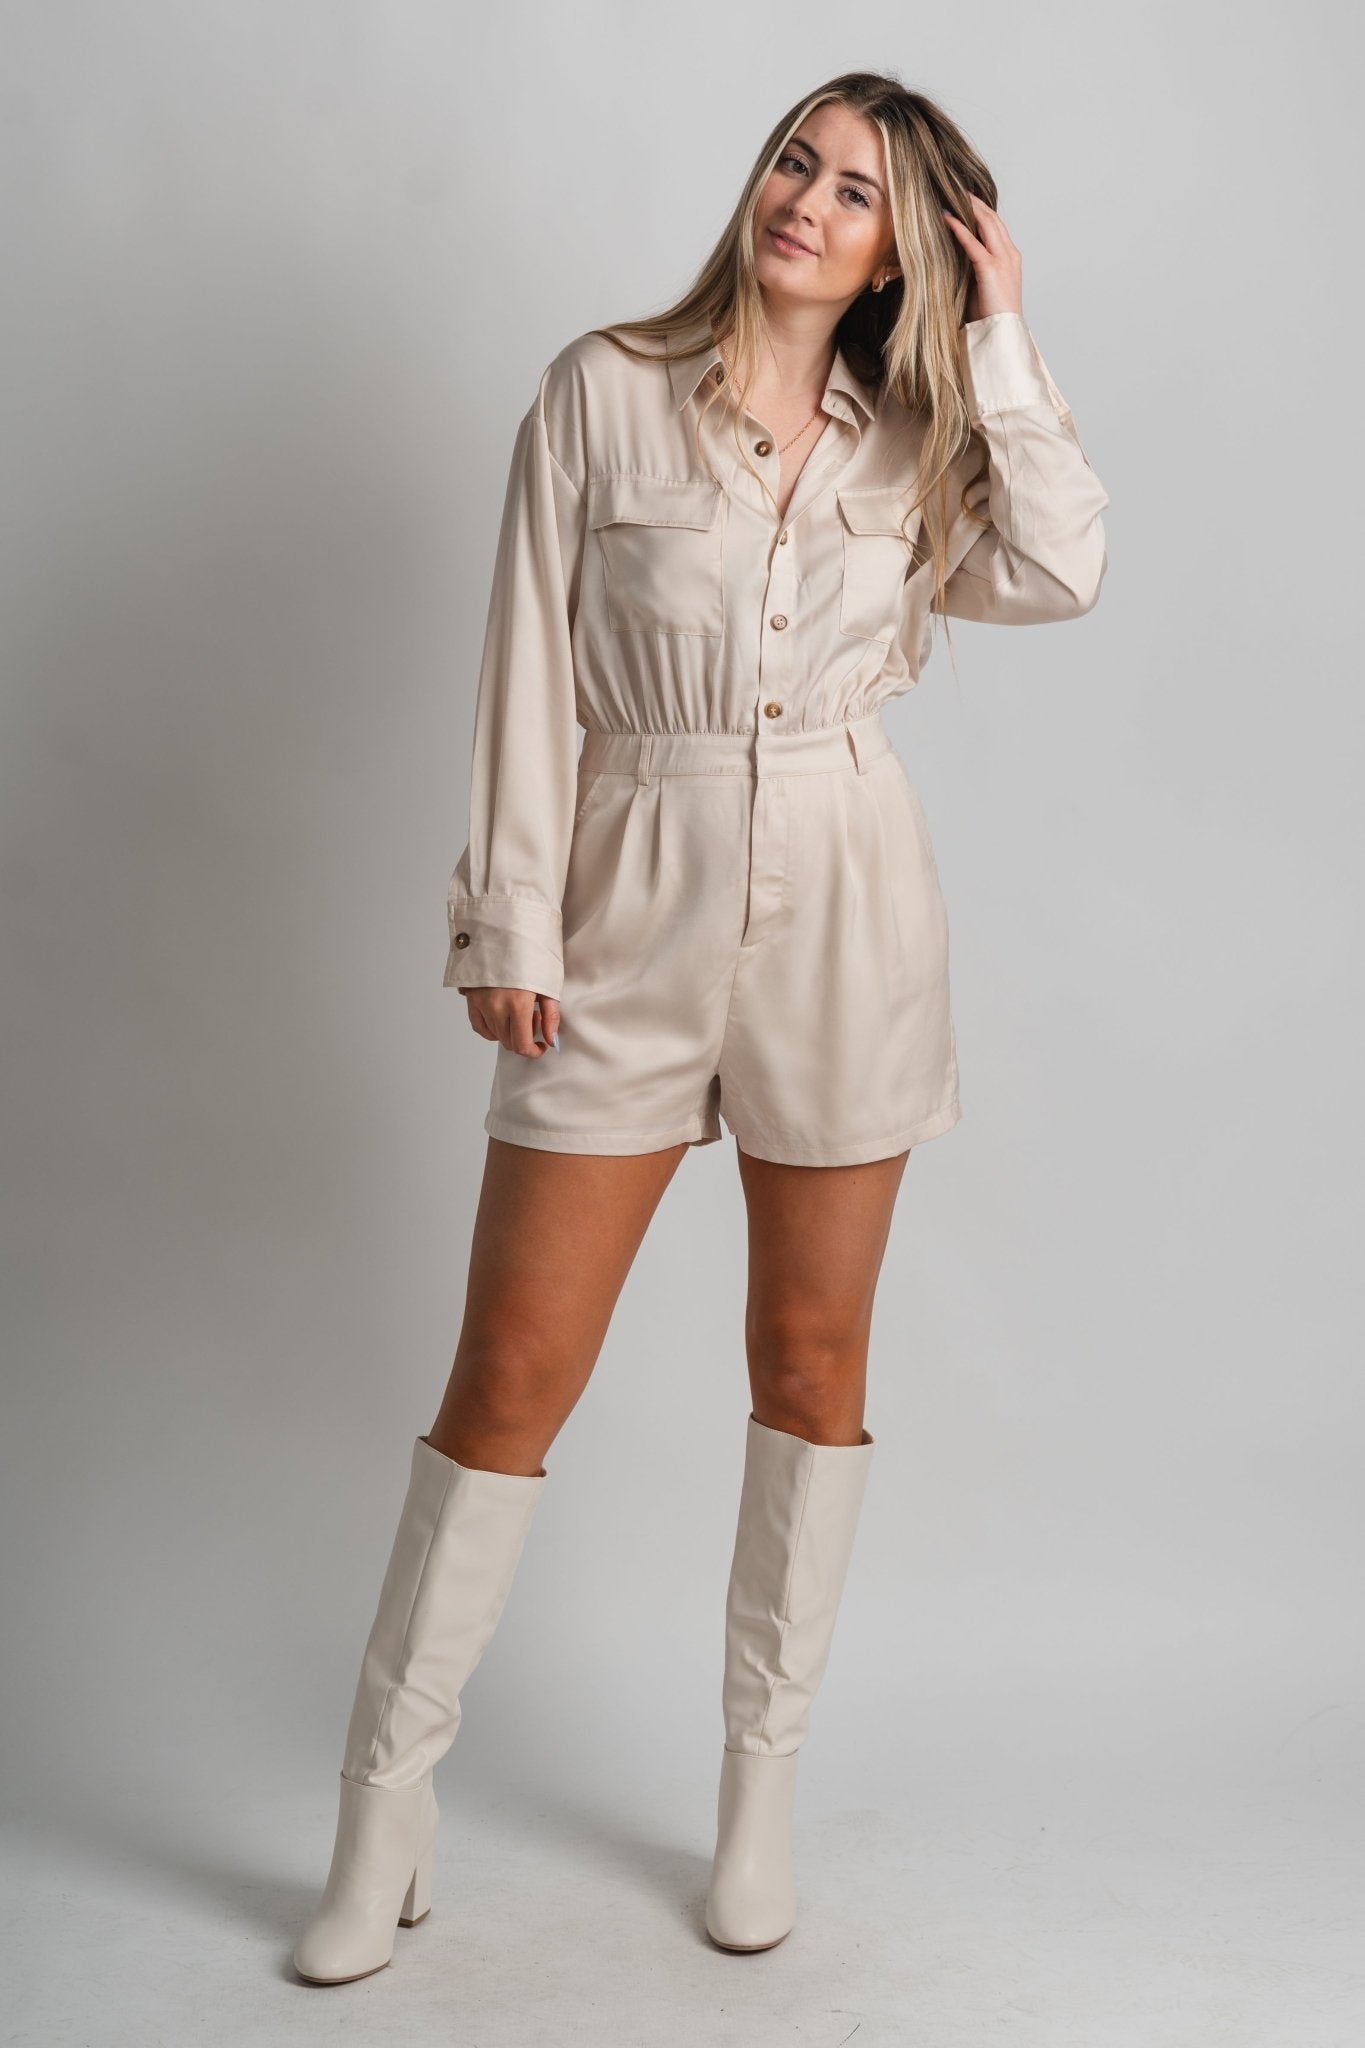 Pocket front blouse romper champagne - Trendy Romper - Fashion Rompers & Pantsuits at Lush Fashion Lounge Boutique in Oklahoma City